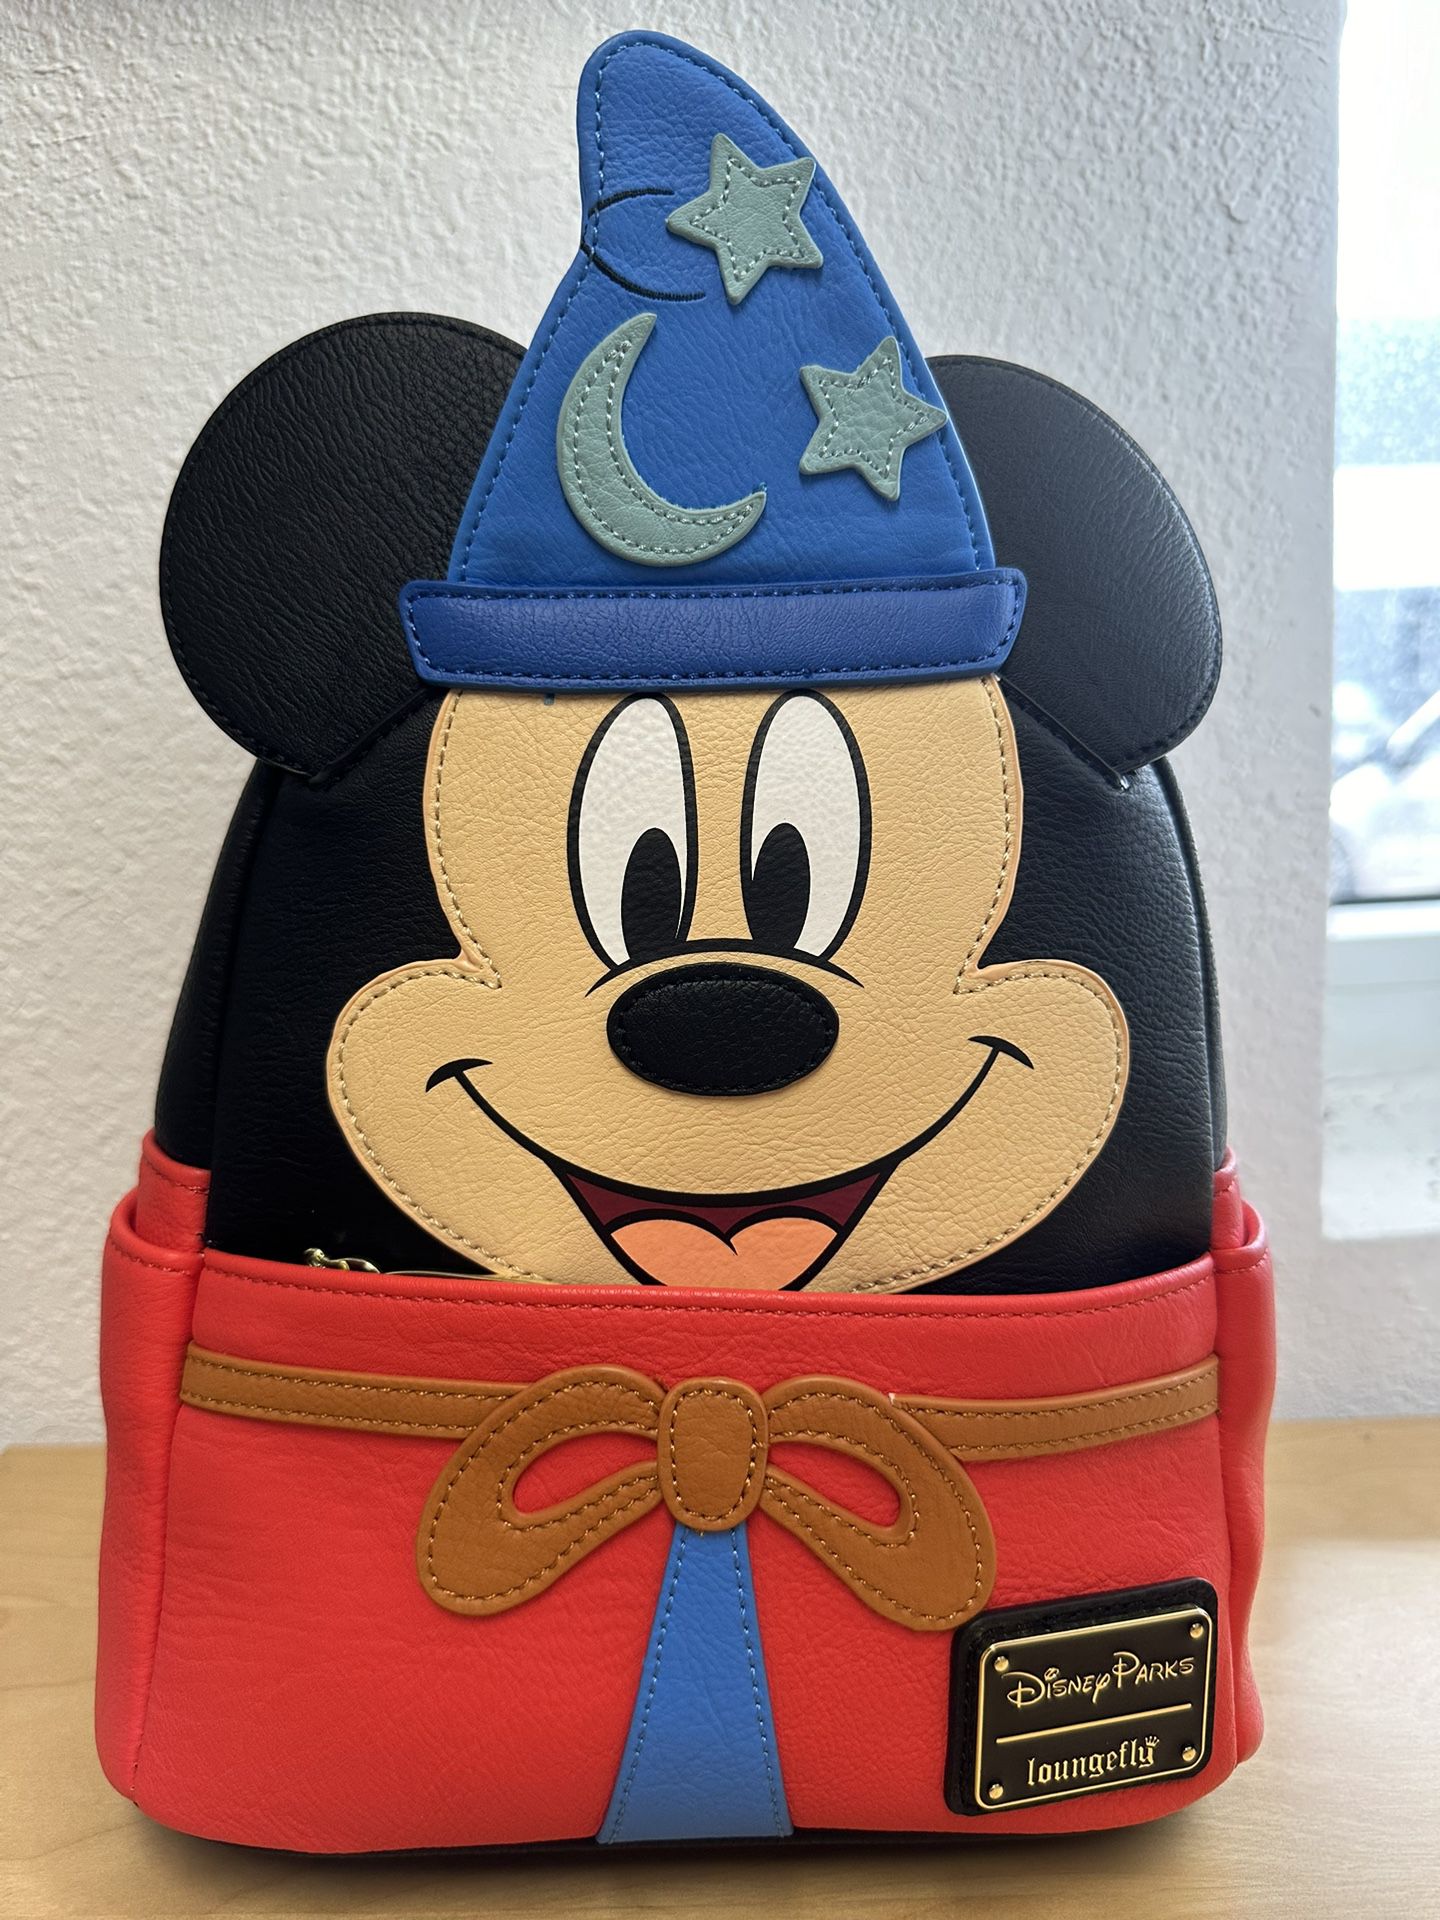 Disney Parks and Box Lunch Loungefly Mini Backpack